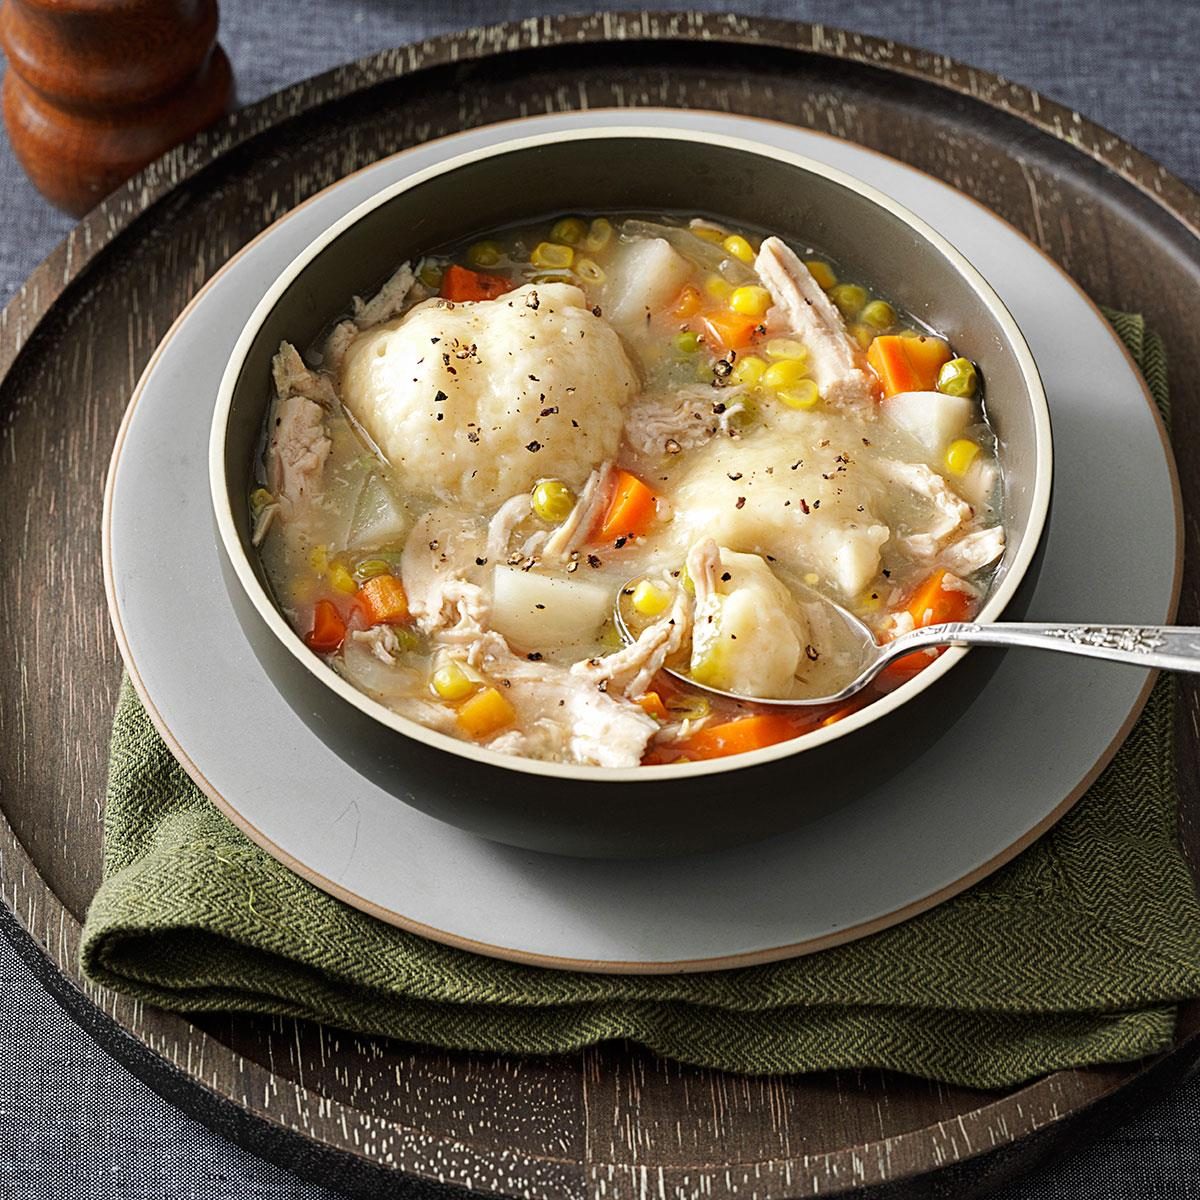 Momma S Turkey Stew With Dumplings Exps135732 Th2379801a07 13 4bc Rms 3